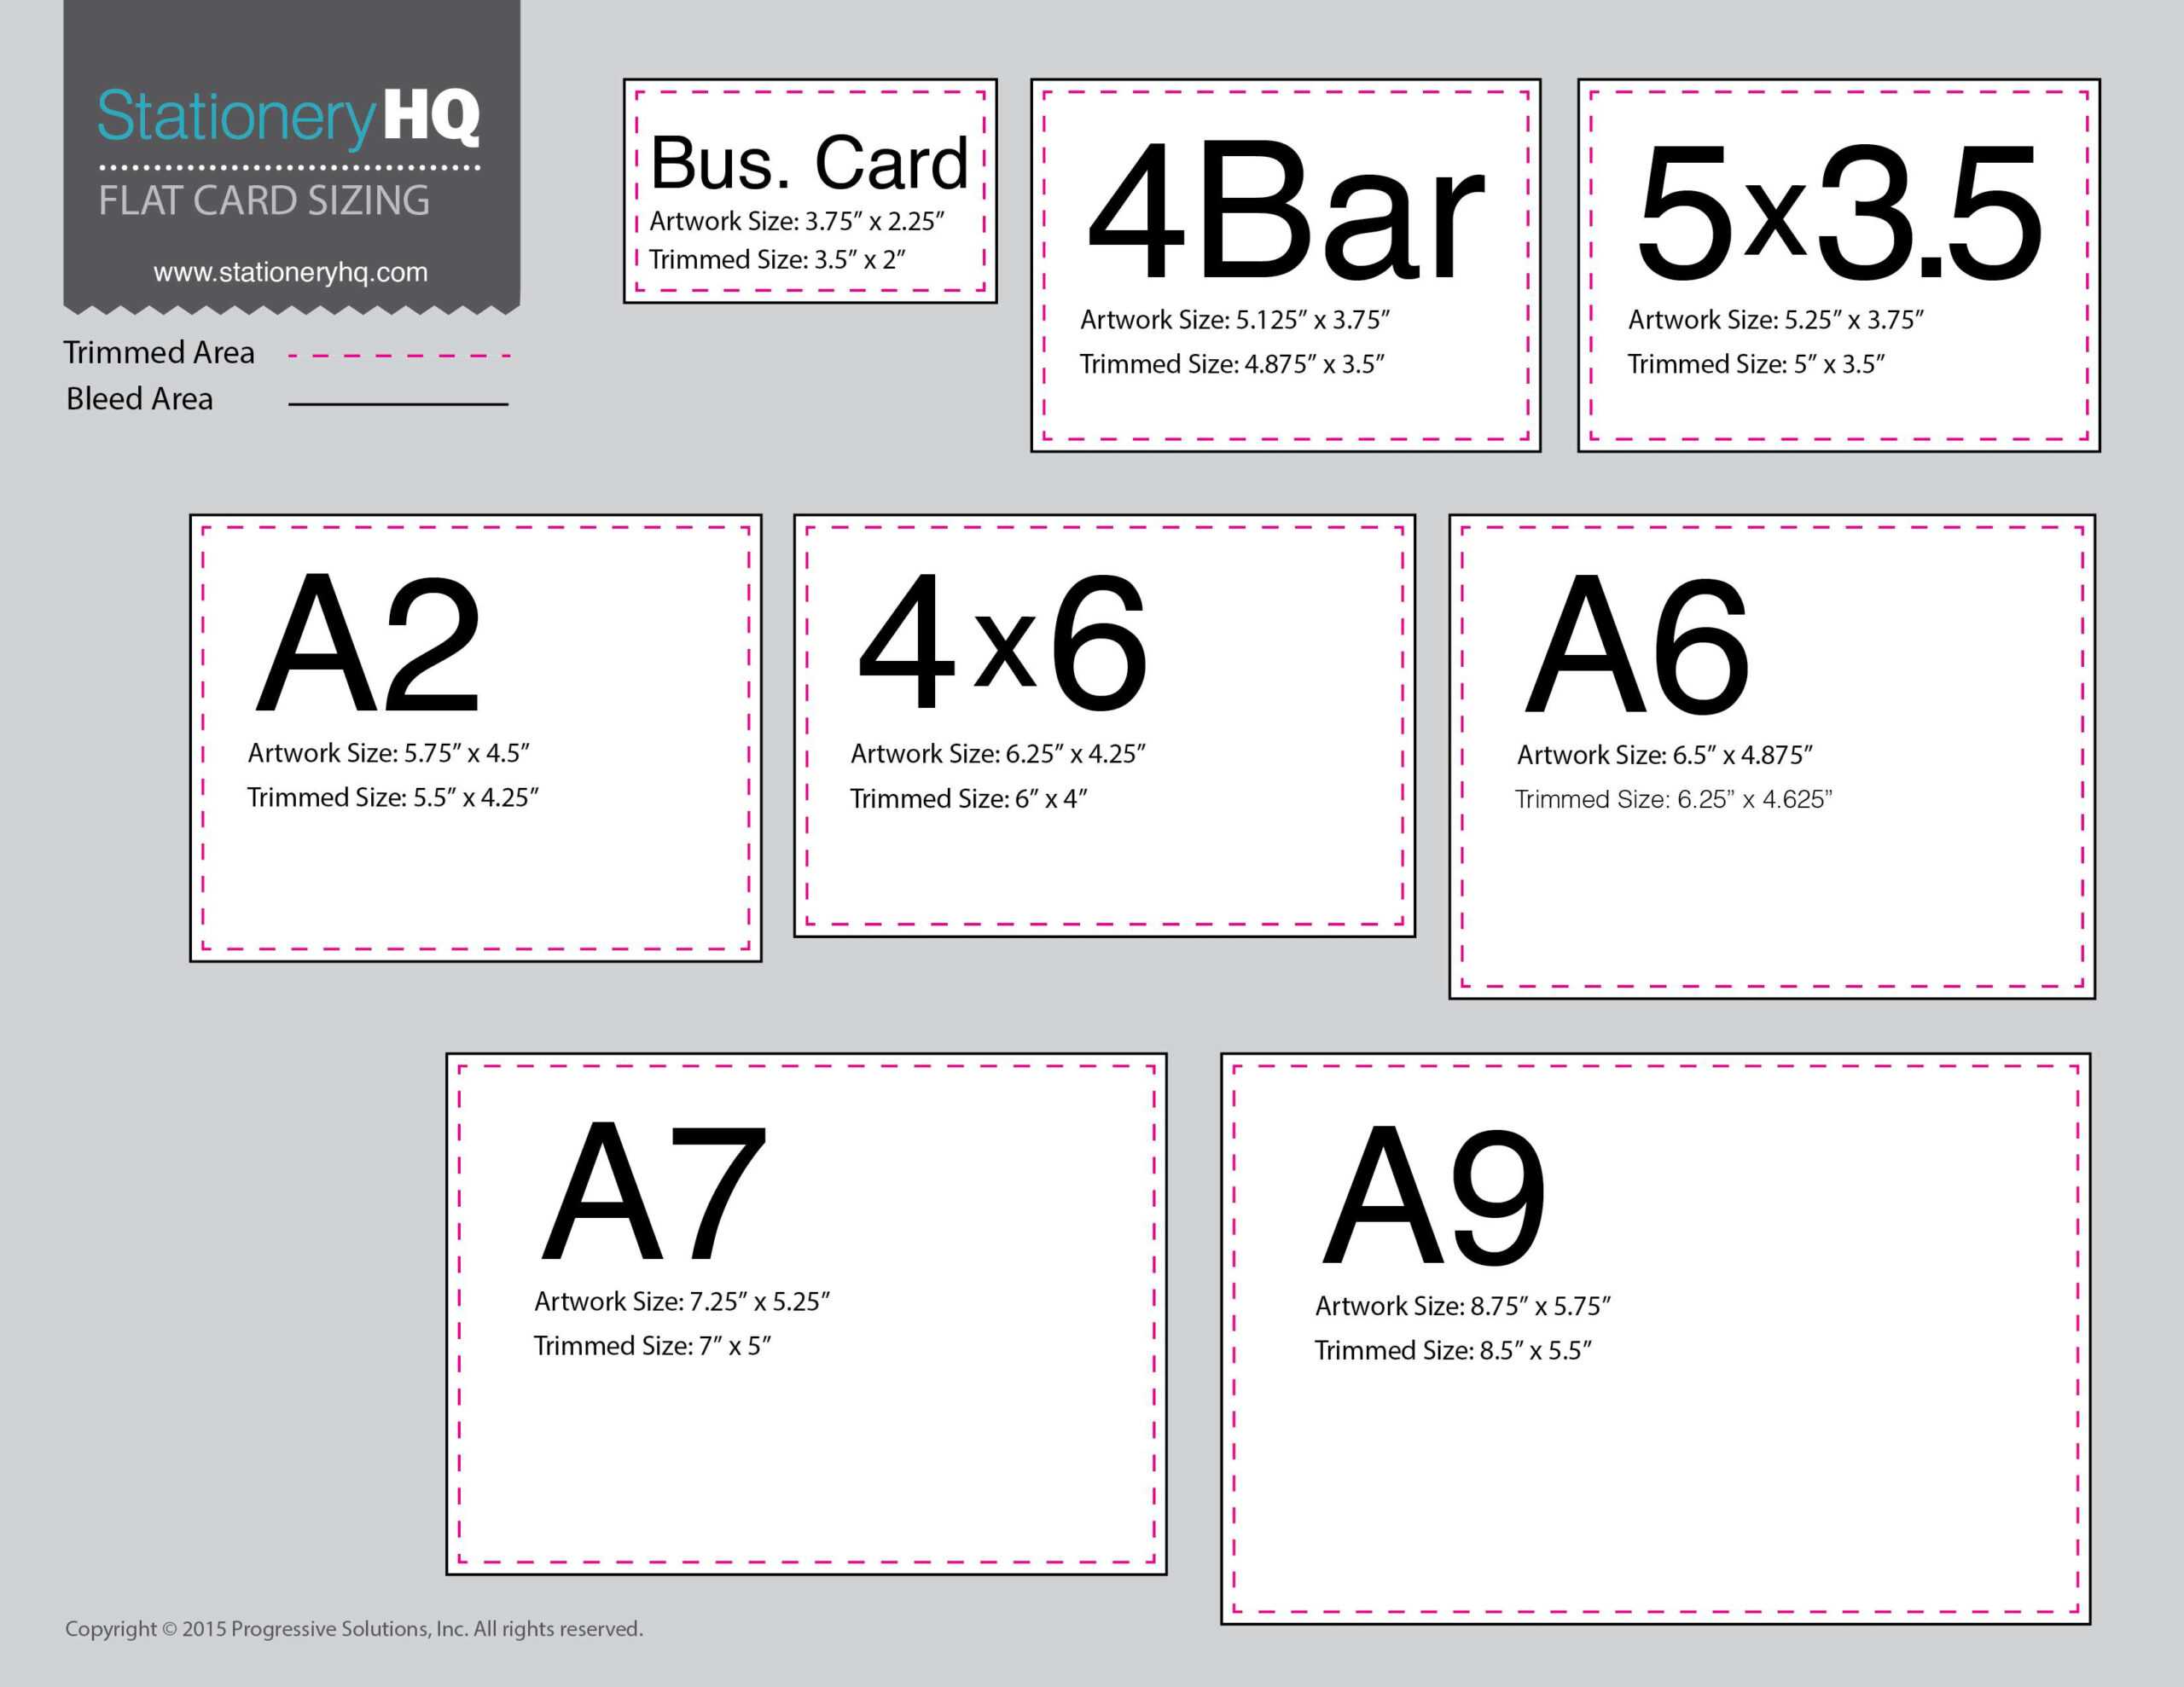 040 Business Cards Sizes Vista Vistaprint Visiting Card Size In A2 Card Template